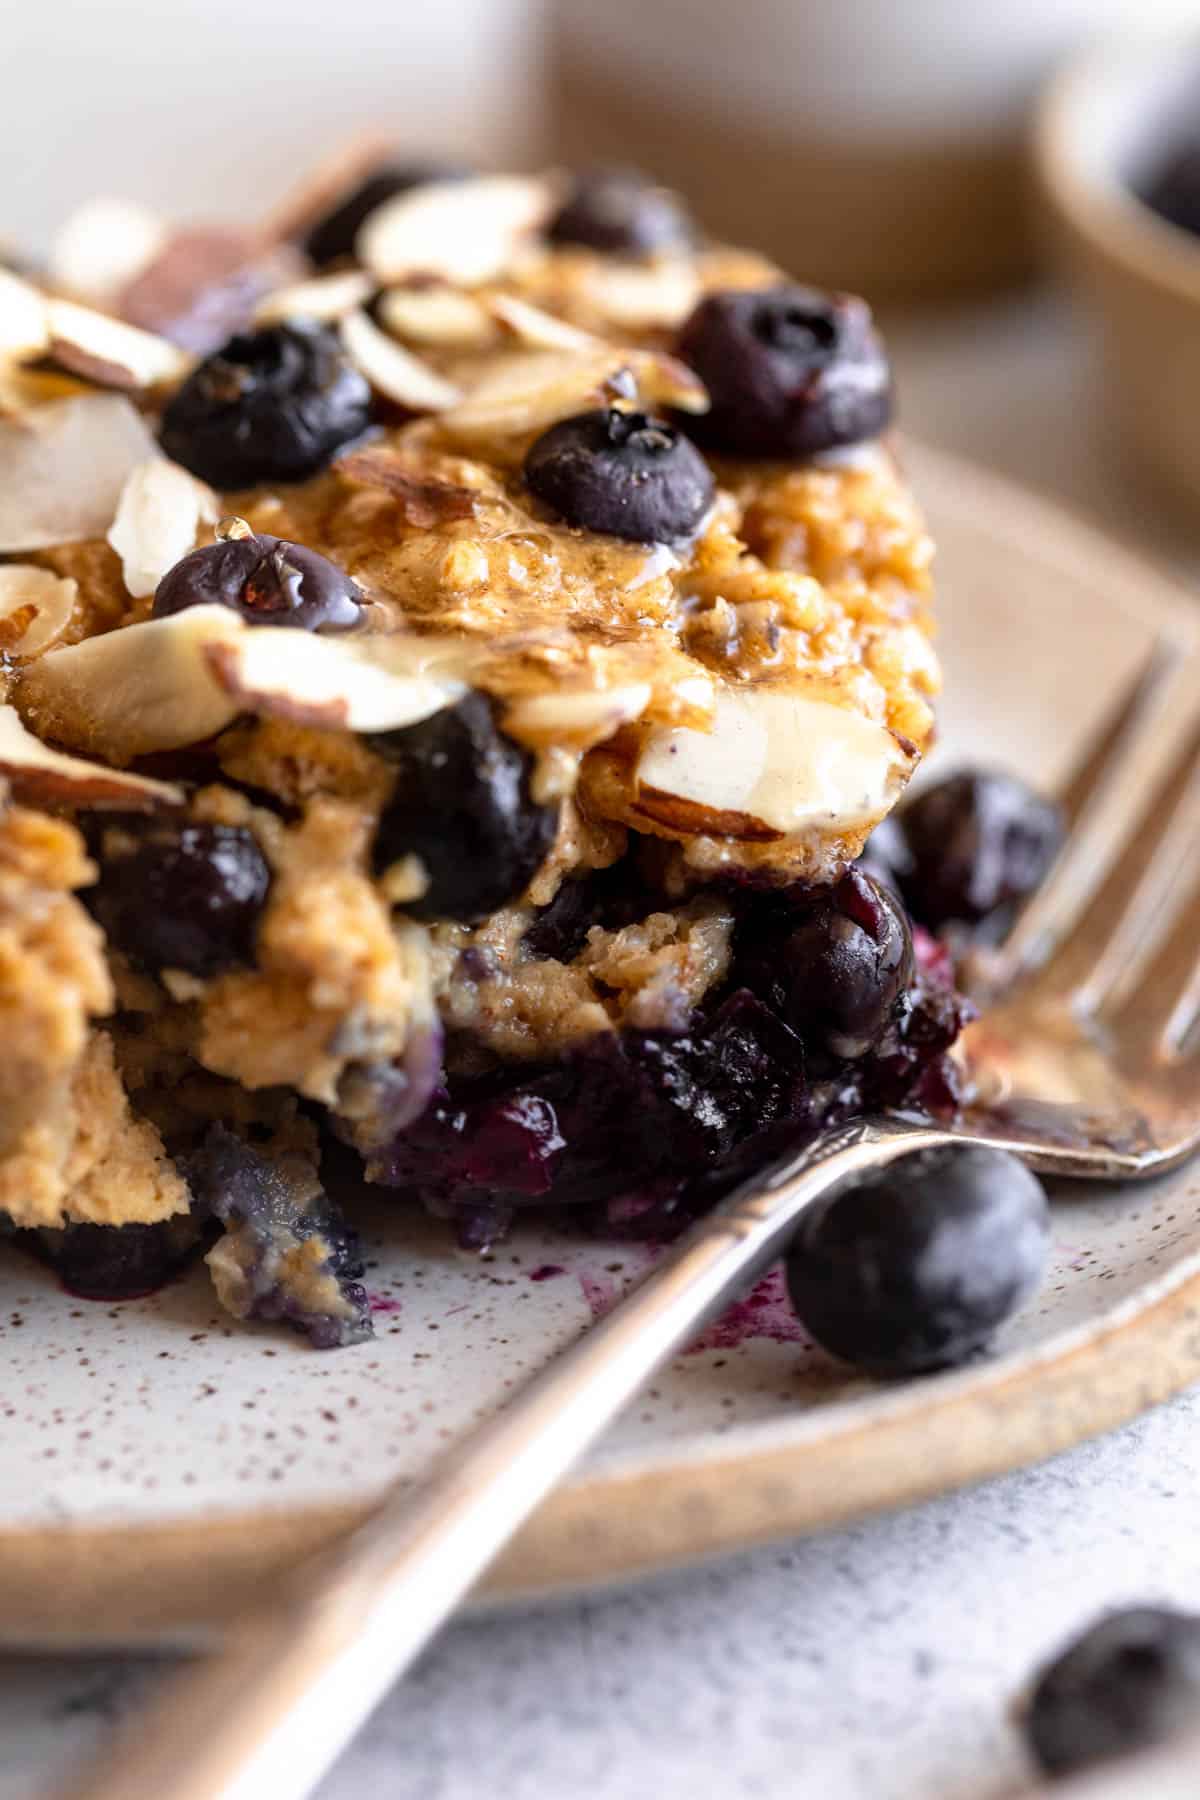 slice of the blueberry baked oatmeal on a plate with a fork